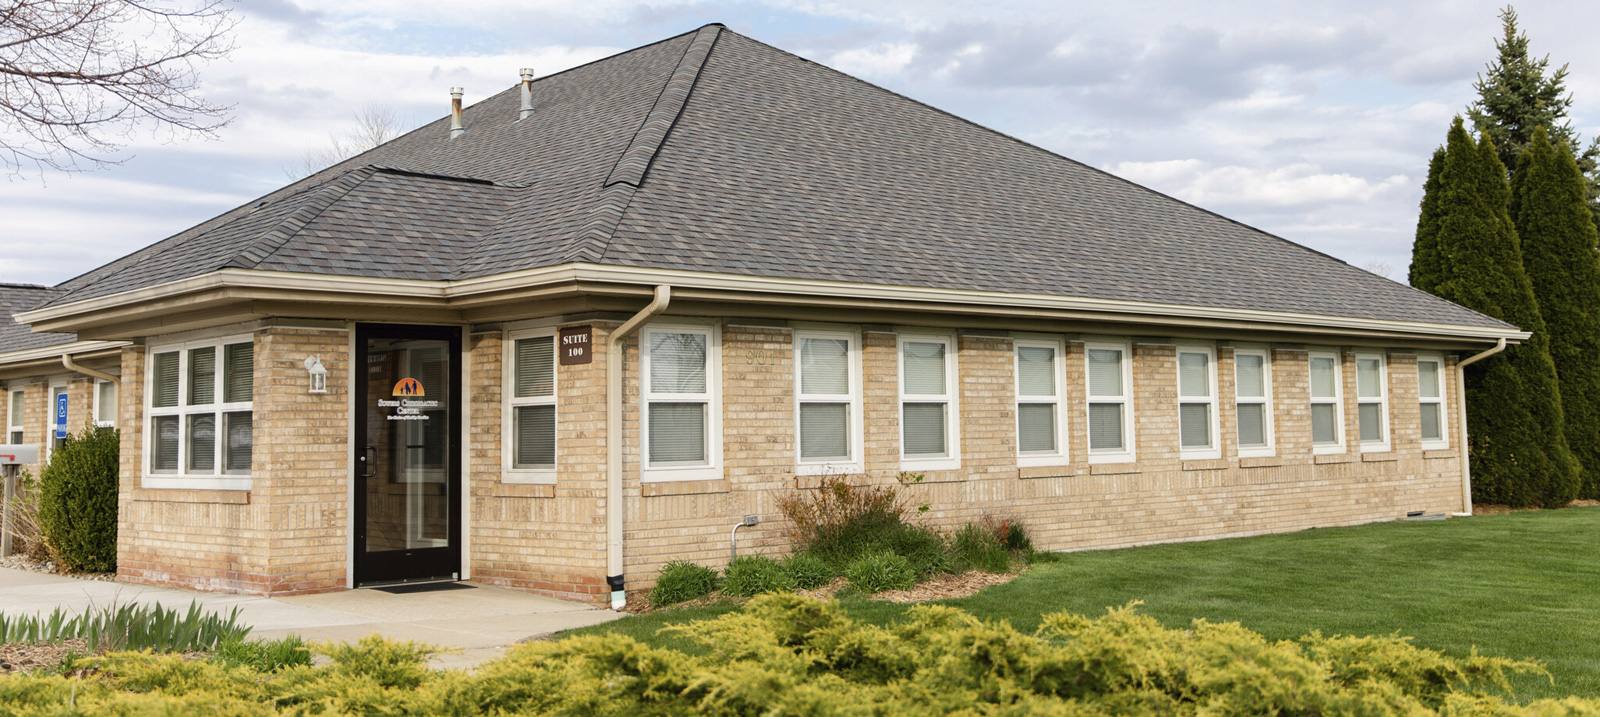 Sowers Chiropractic Center building exterior